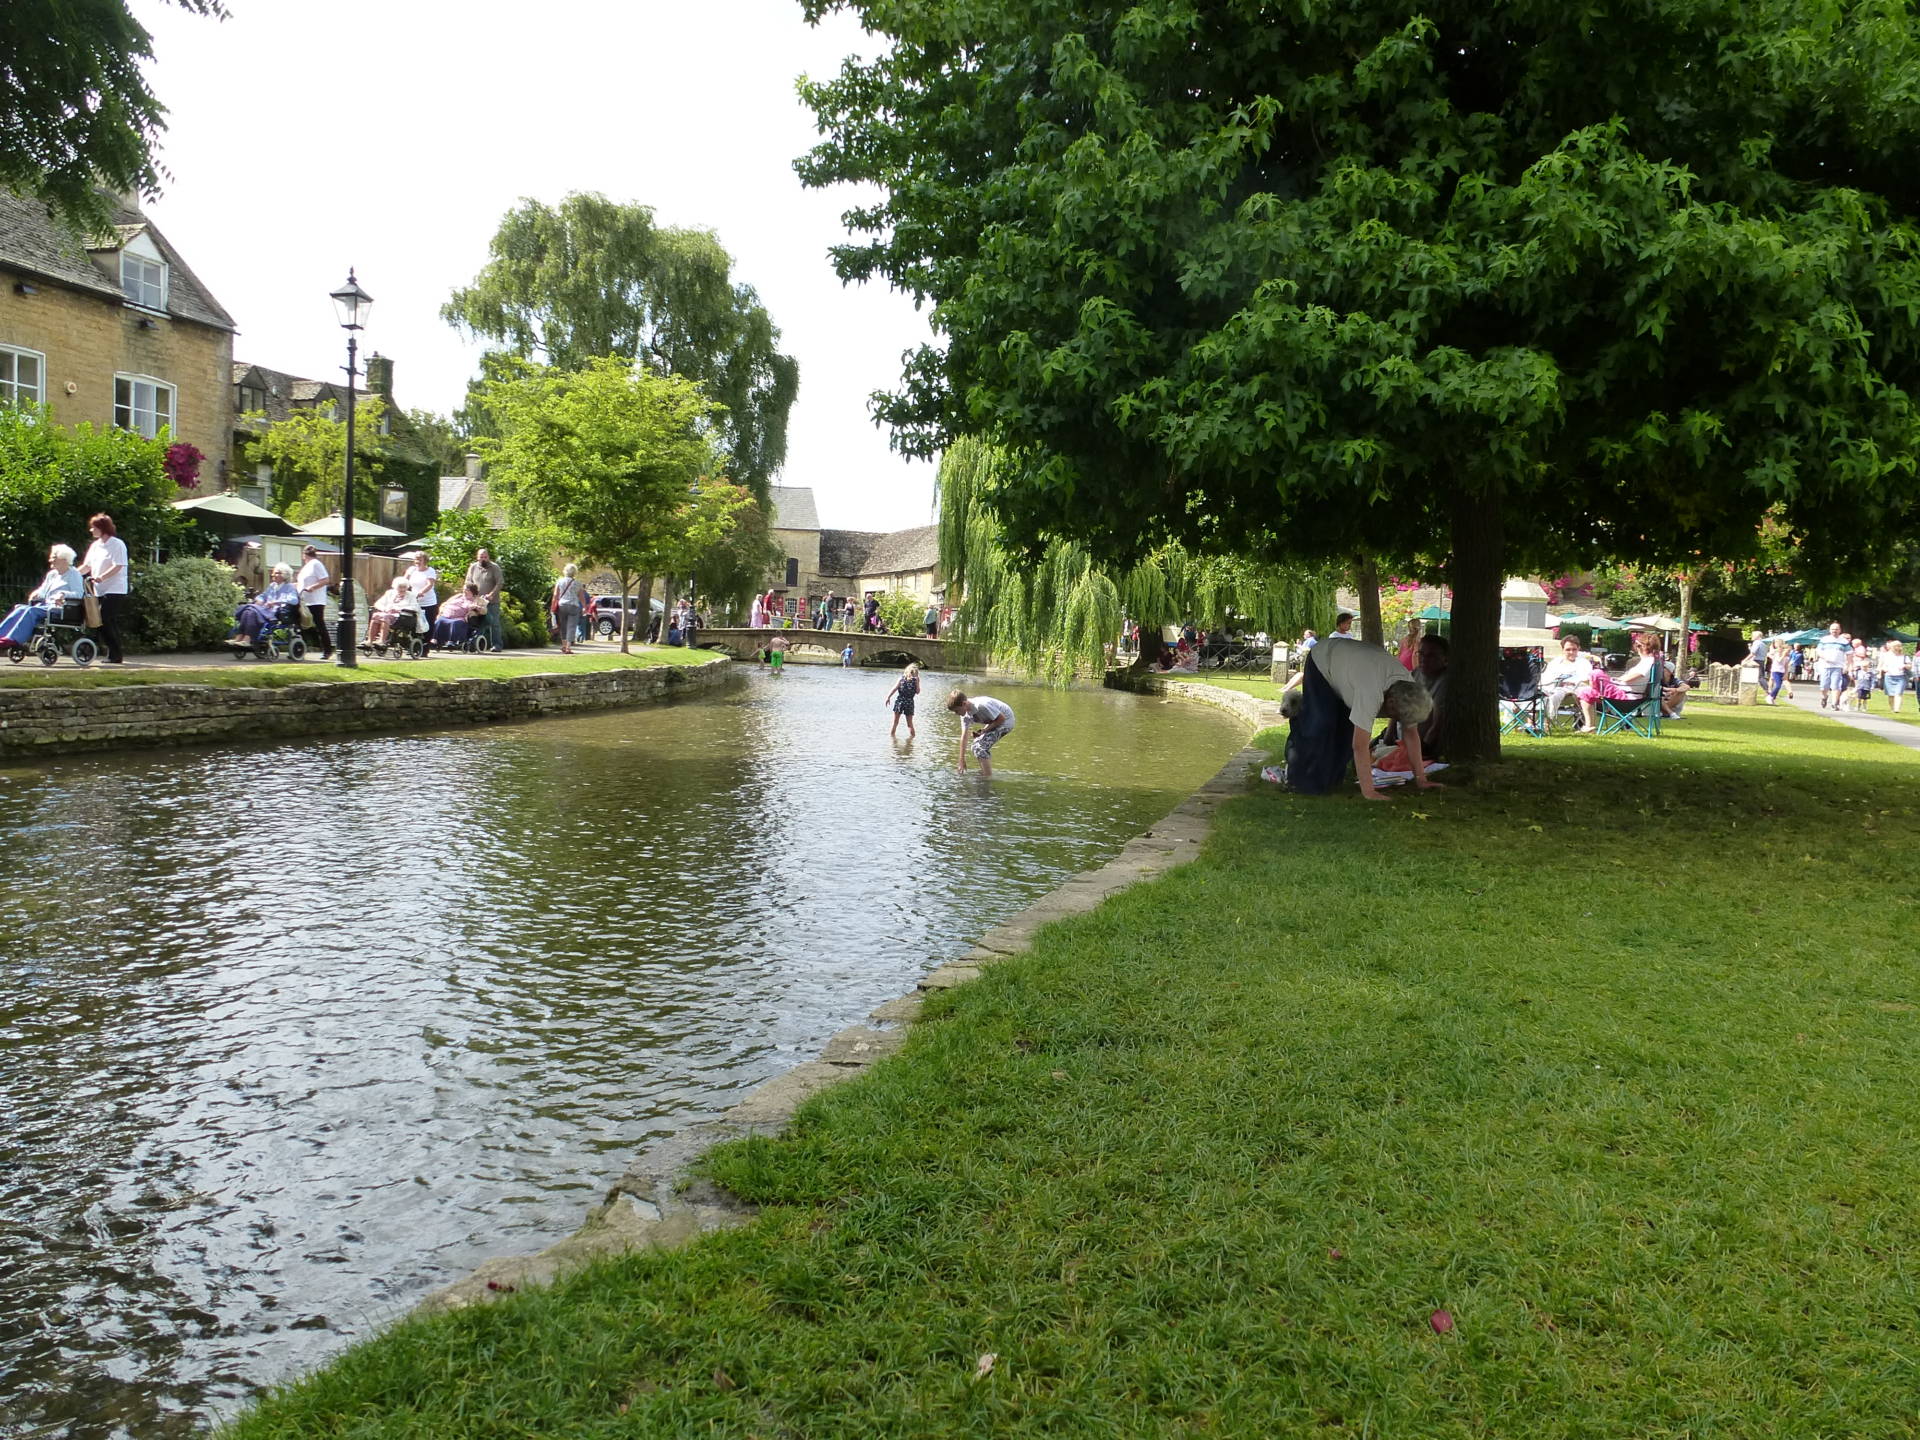 Places to visit - Bourton on the Water